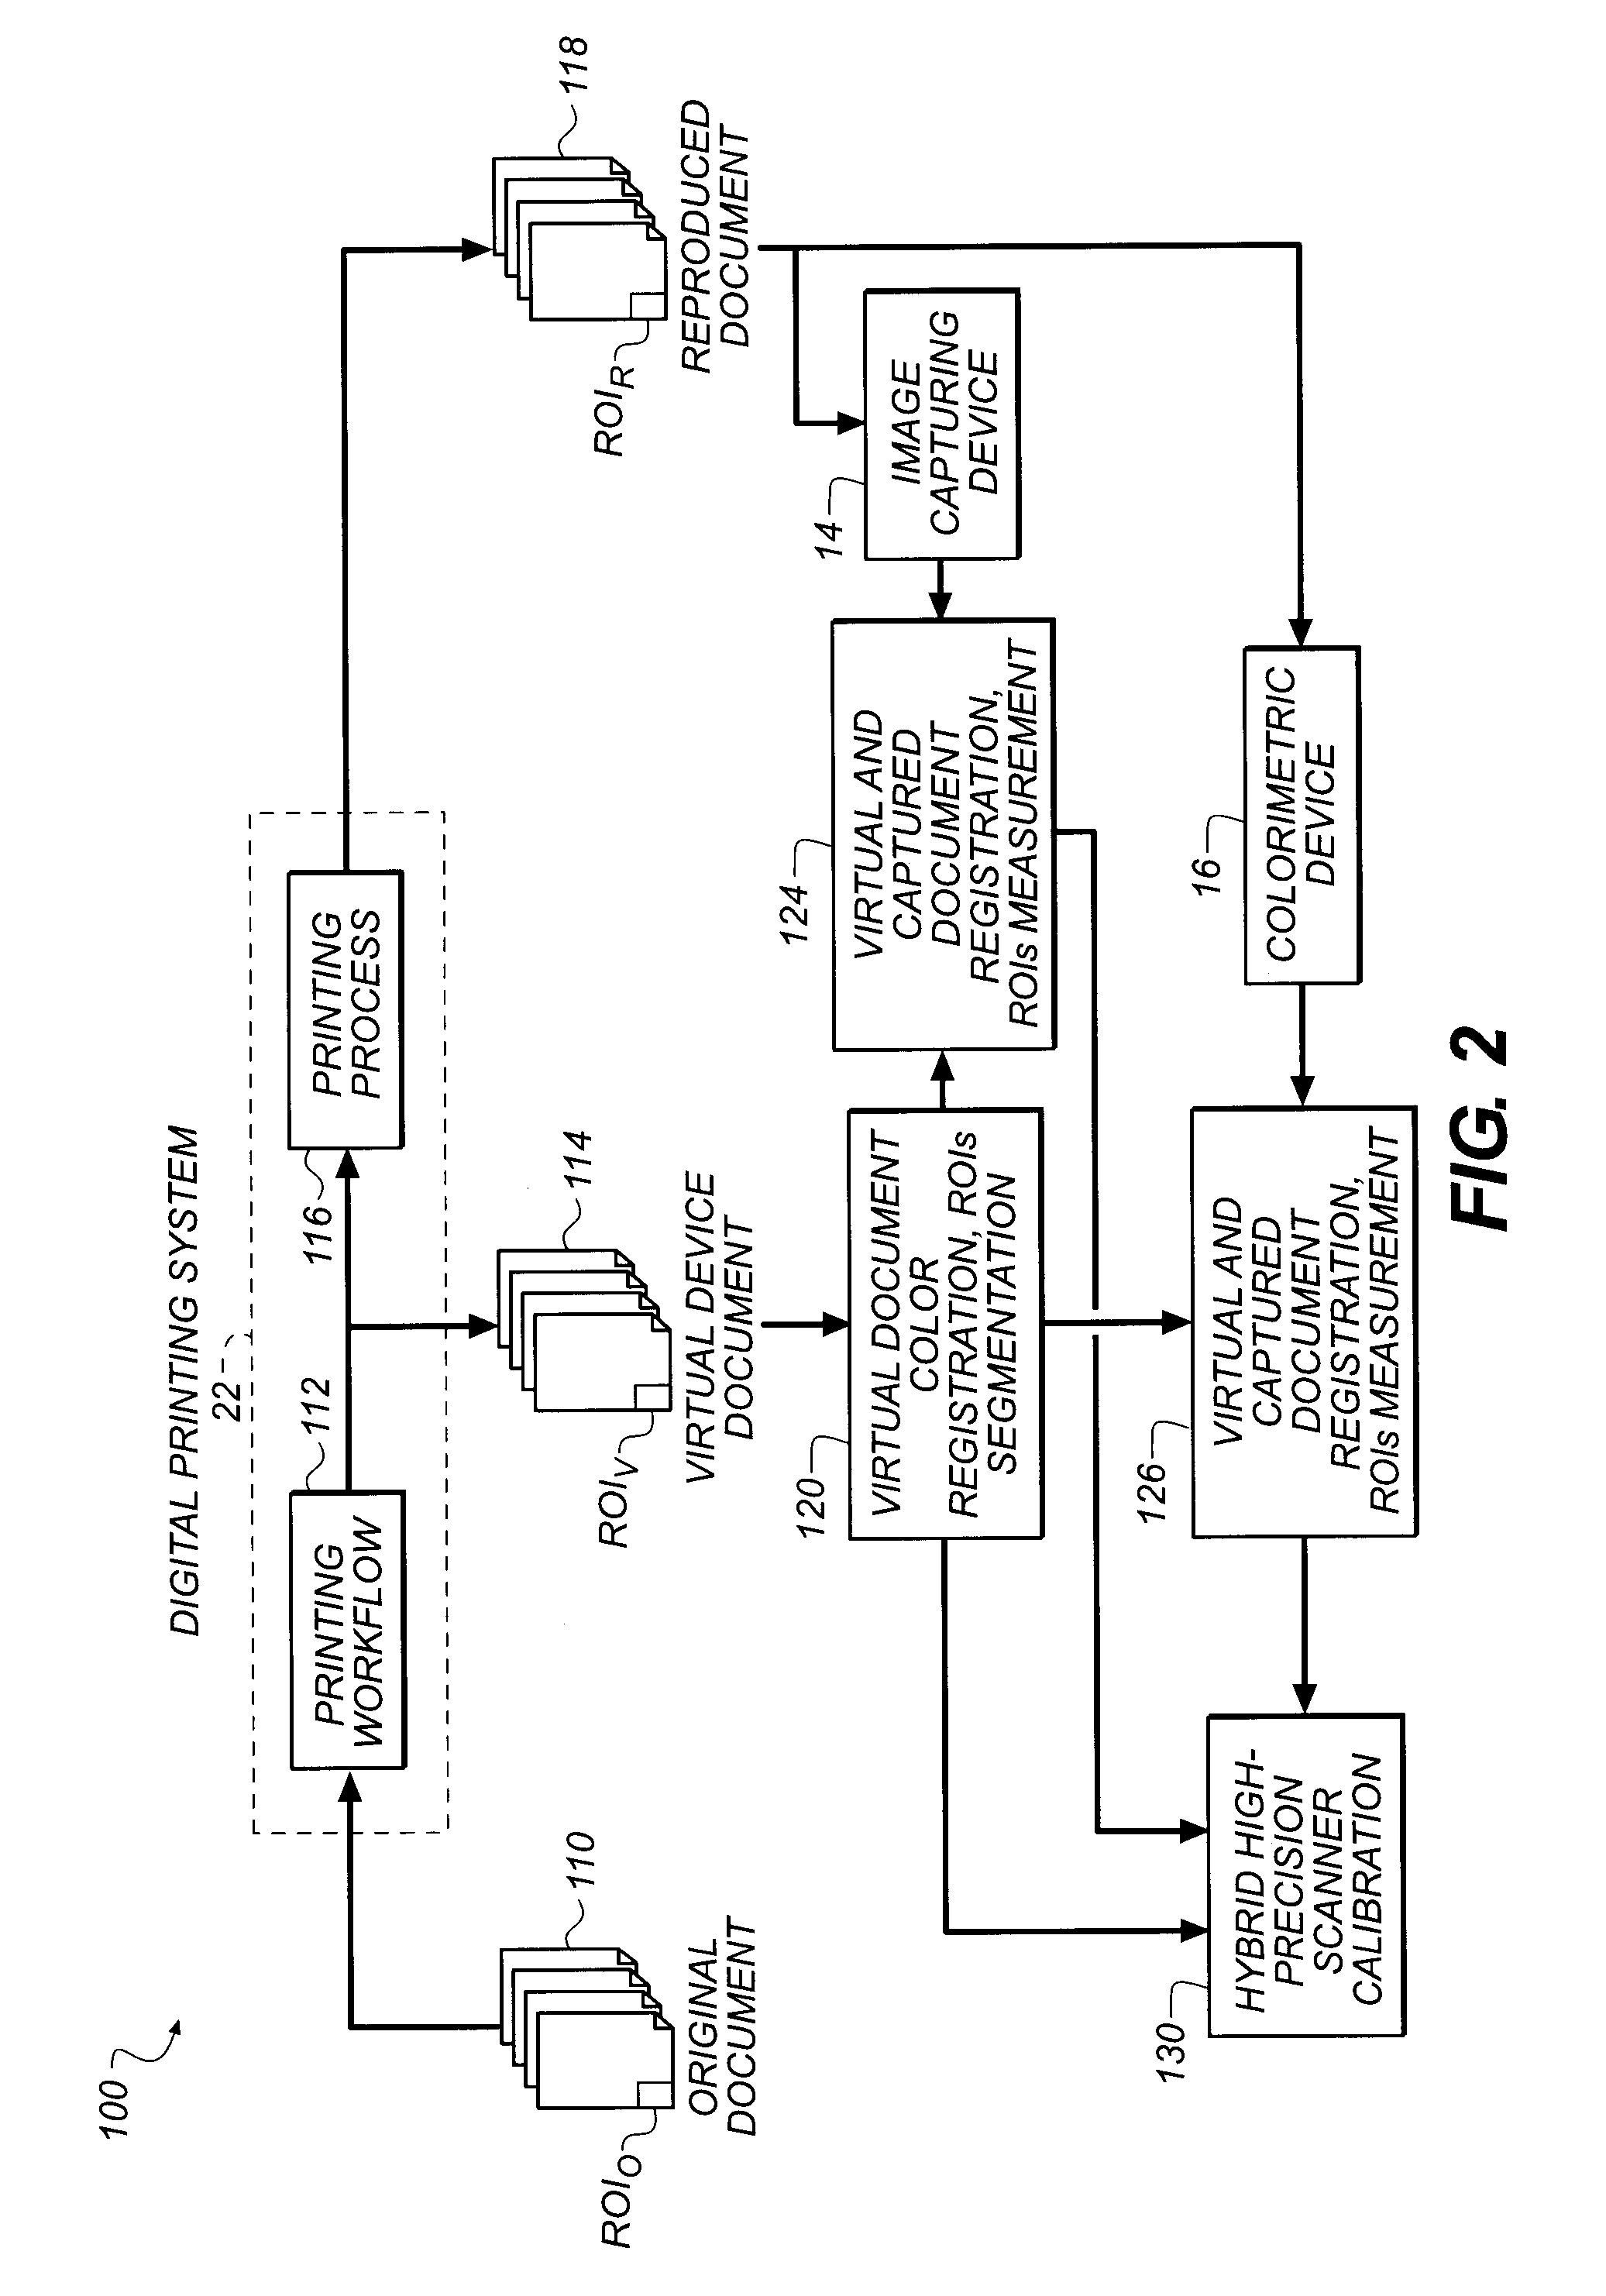 Image control system and method